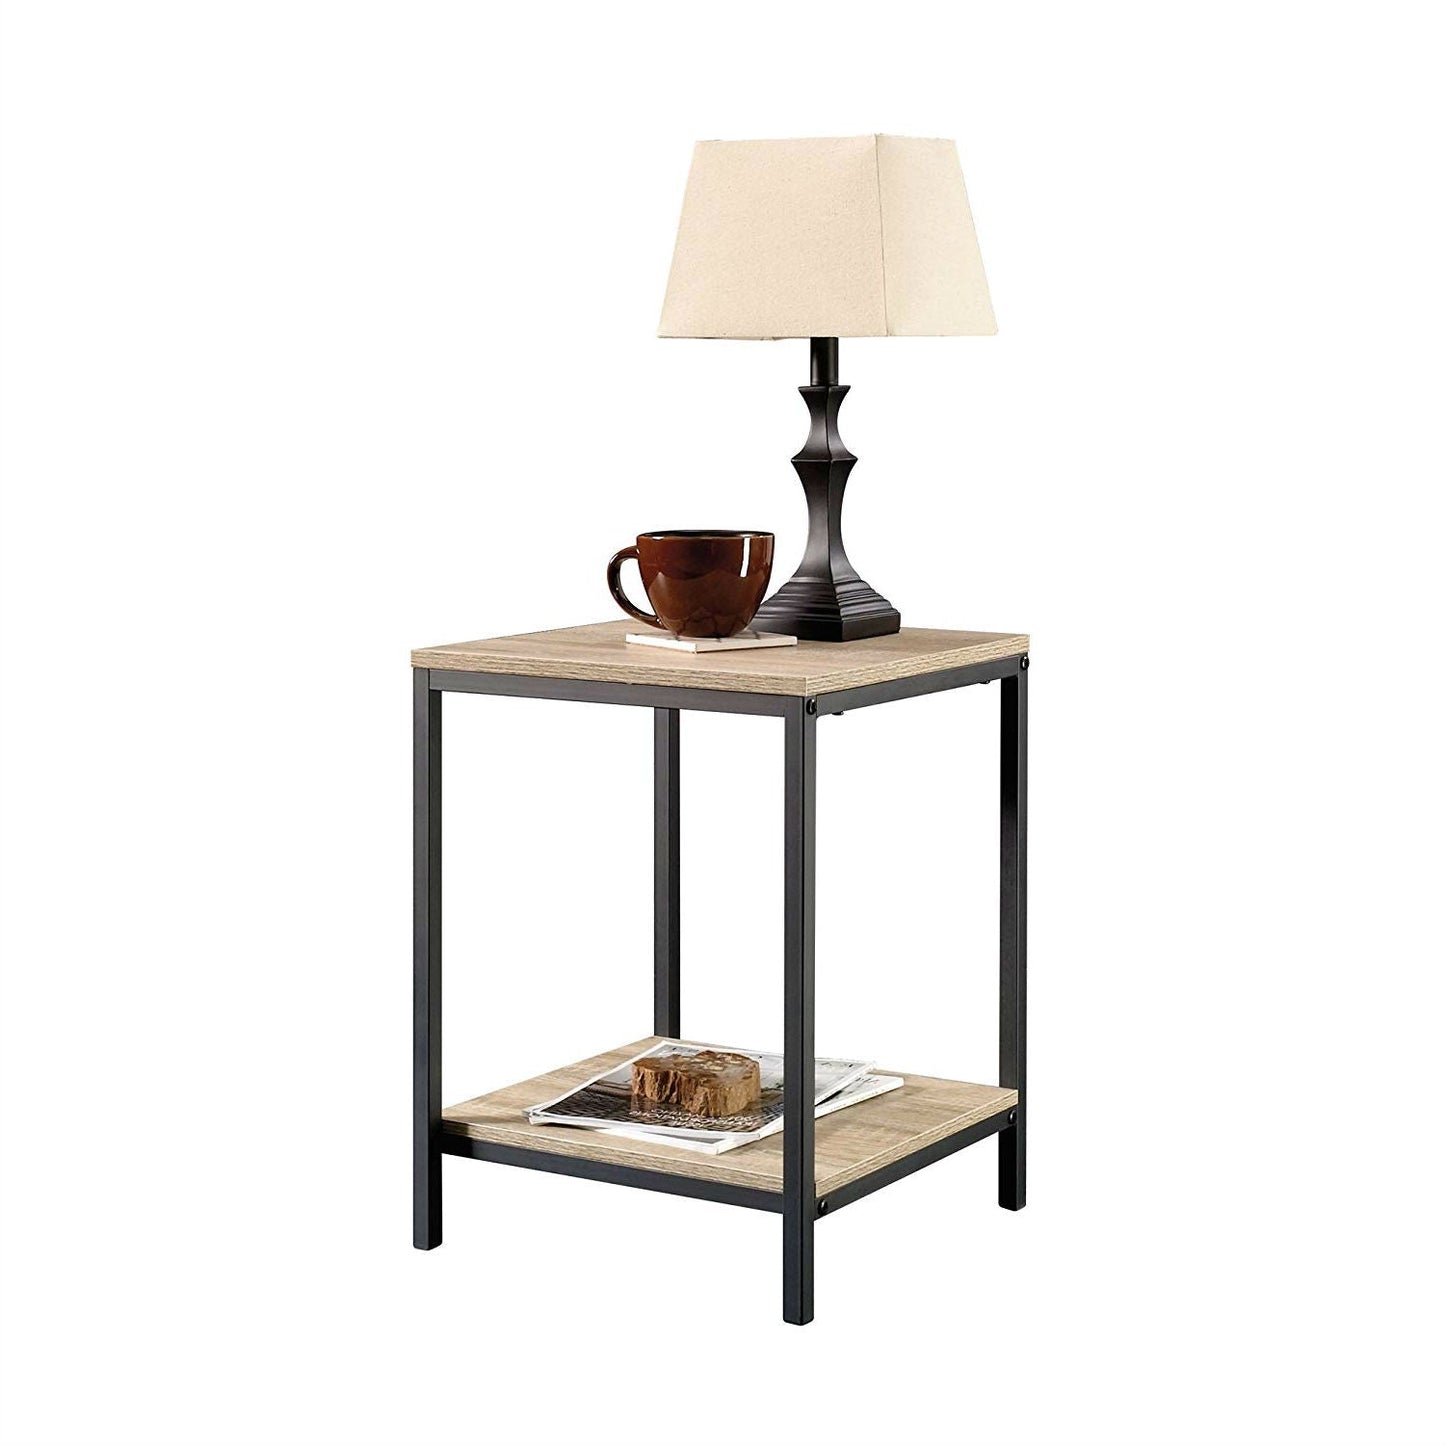 Bedroom > Nightstand And Dressers - Modern Black Metal Frame End Table With Oak Finish Wood Top And Bottom Shelf